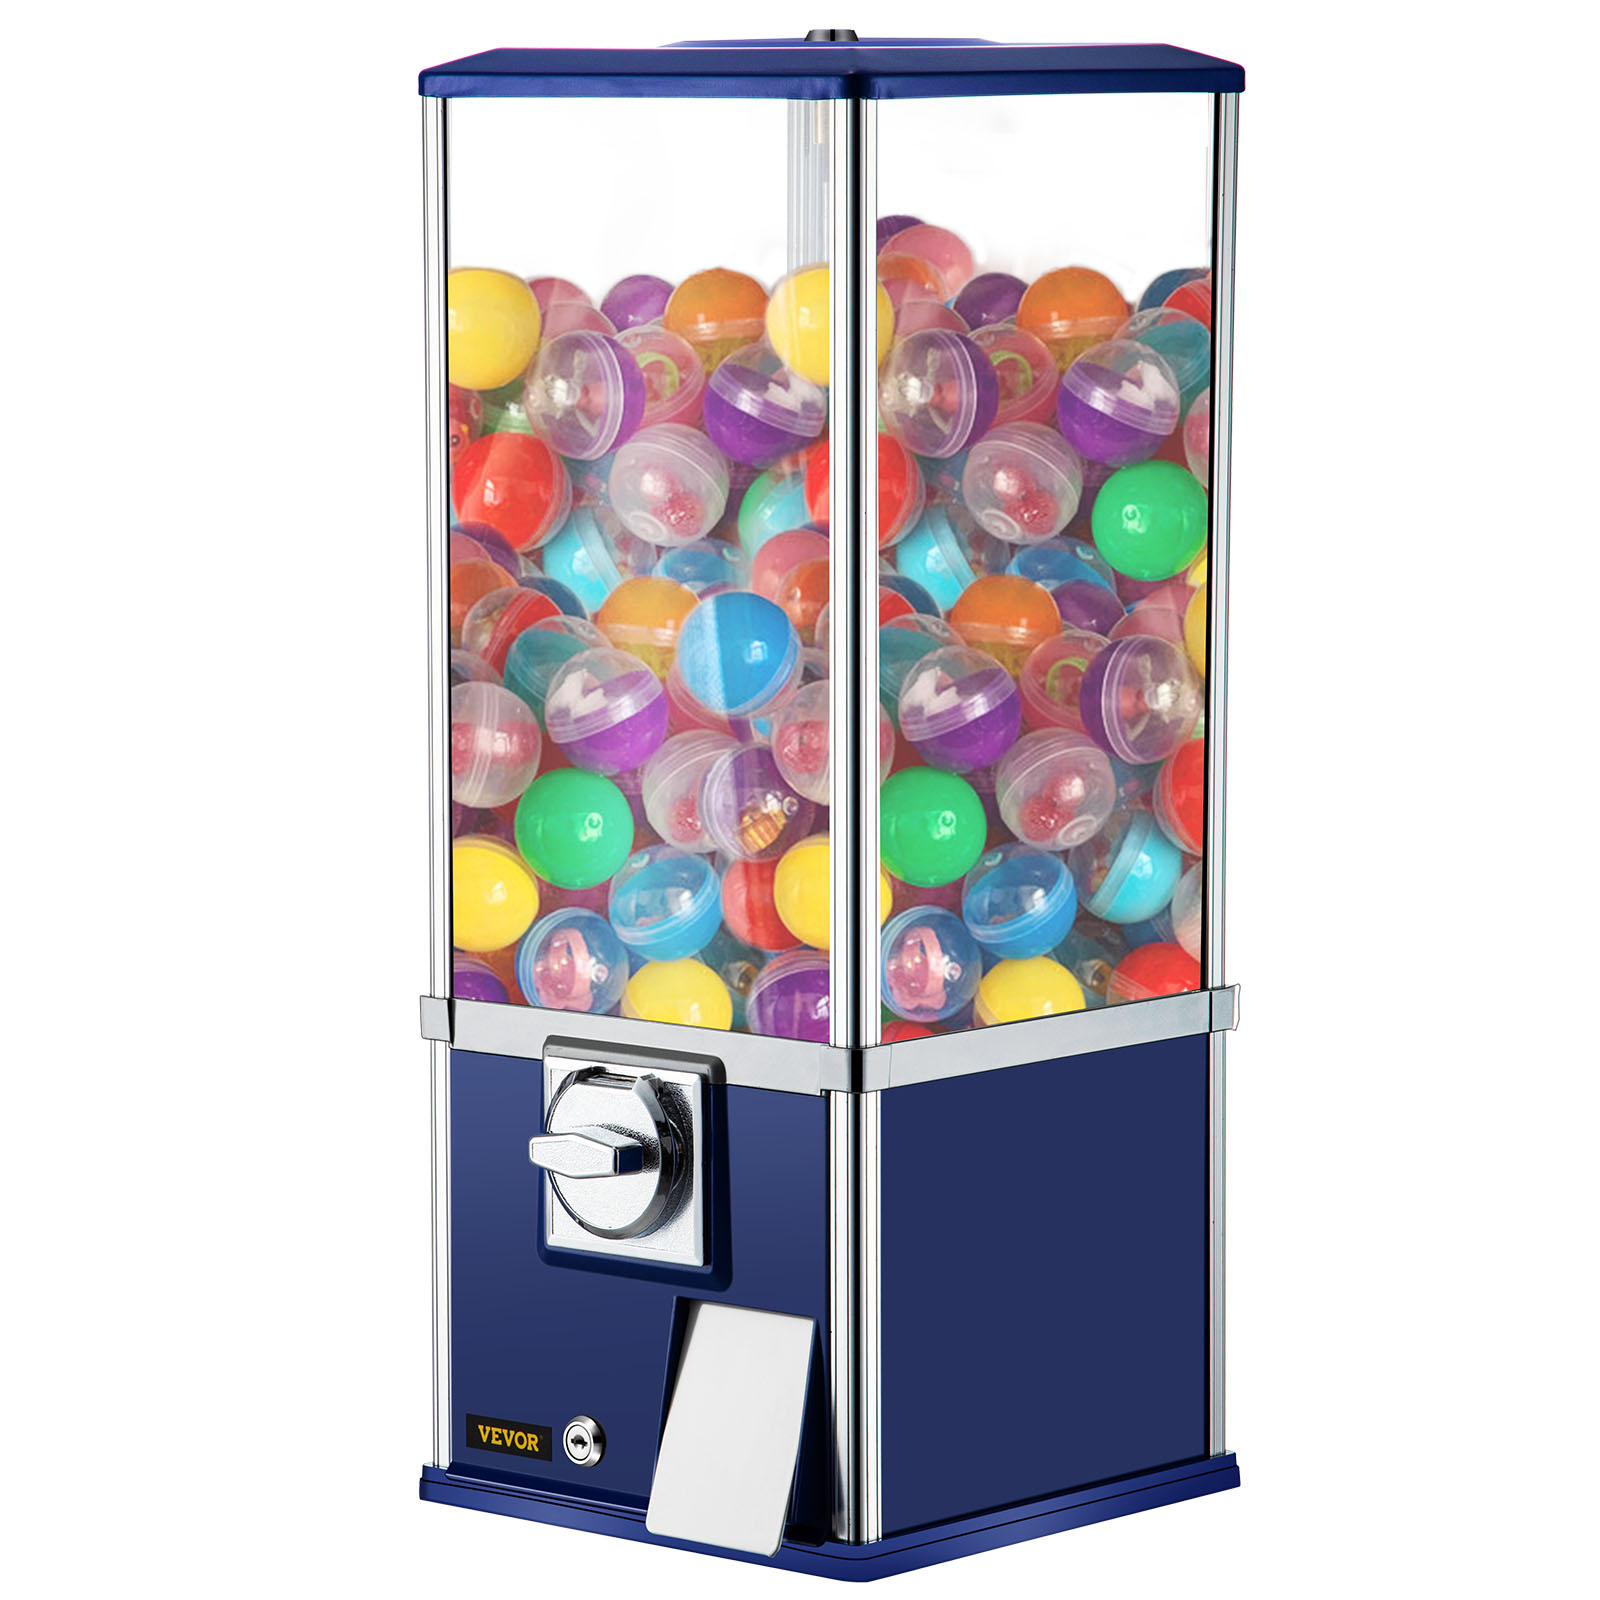 Vevor Gumball Machine Gumball Coin Bank 25.2" Height Vending Machine Vintage от Vevor Many GEOs